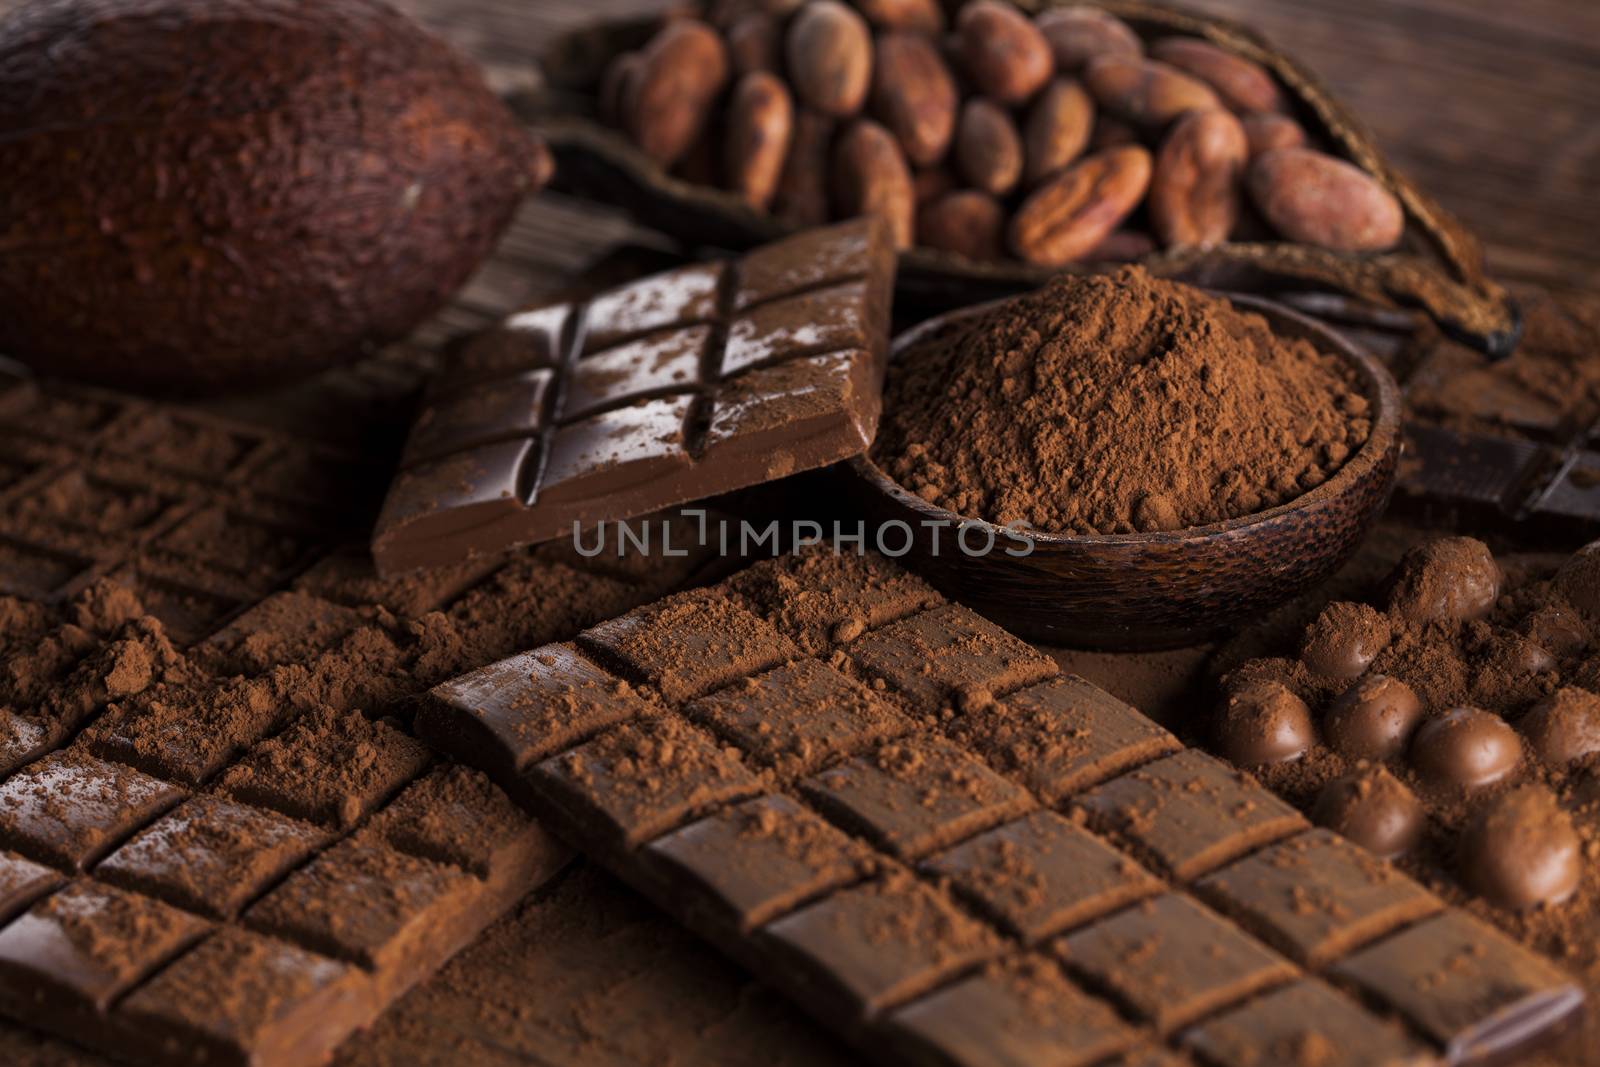 Dark and milk chocolate bar on a wooden table